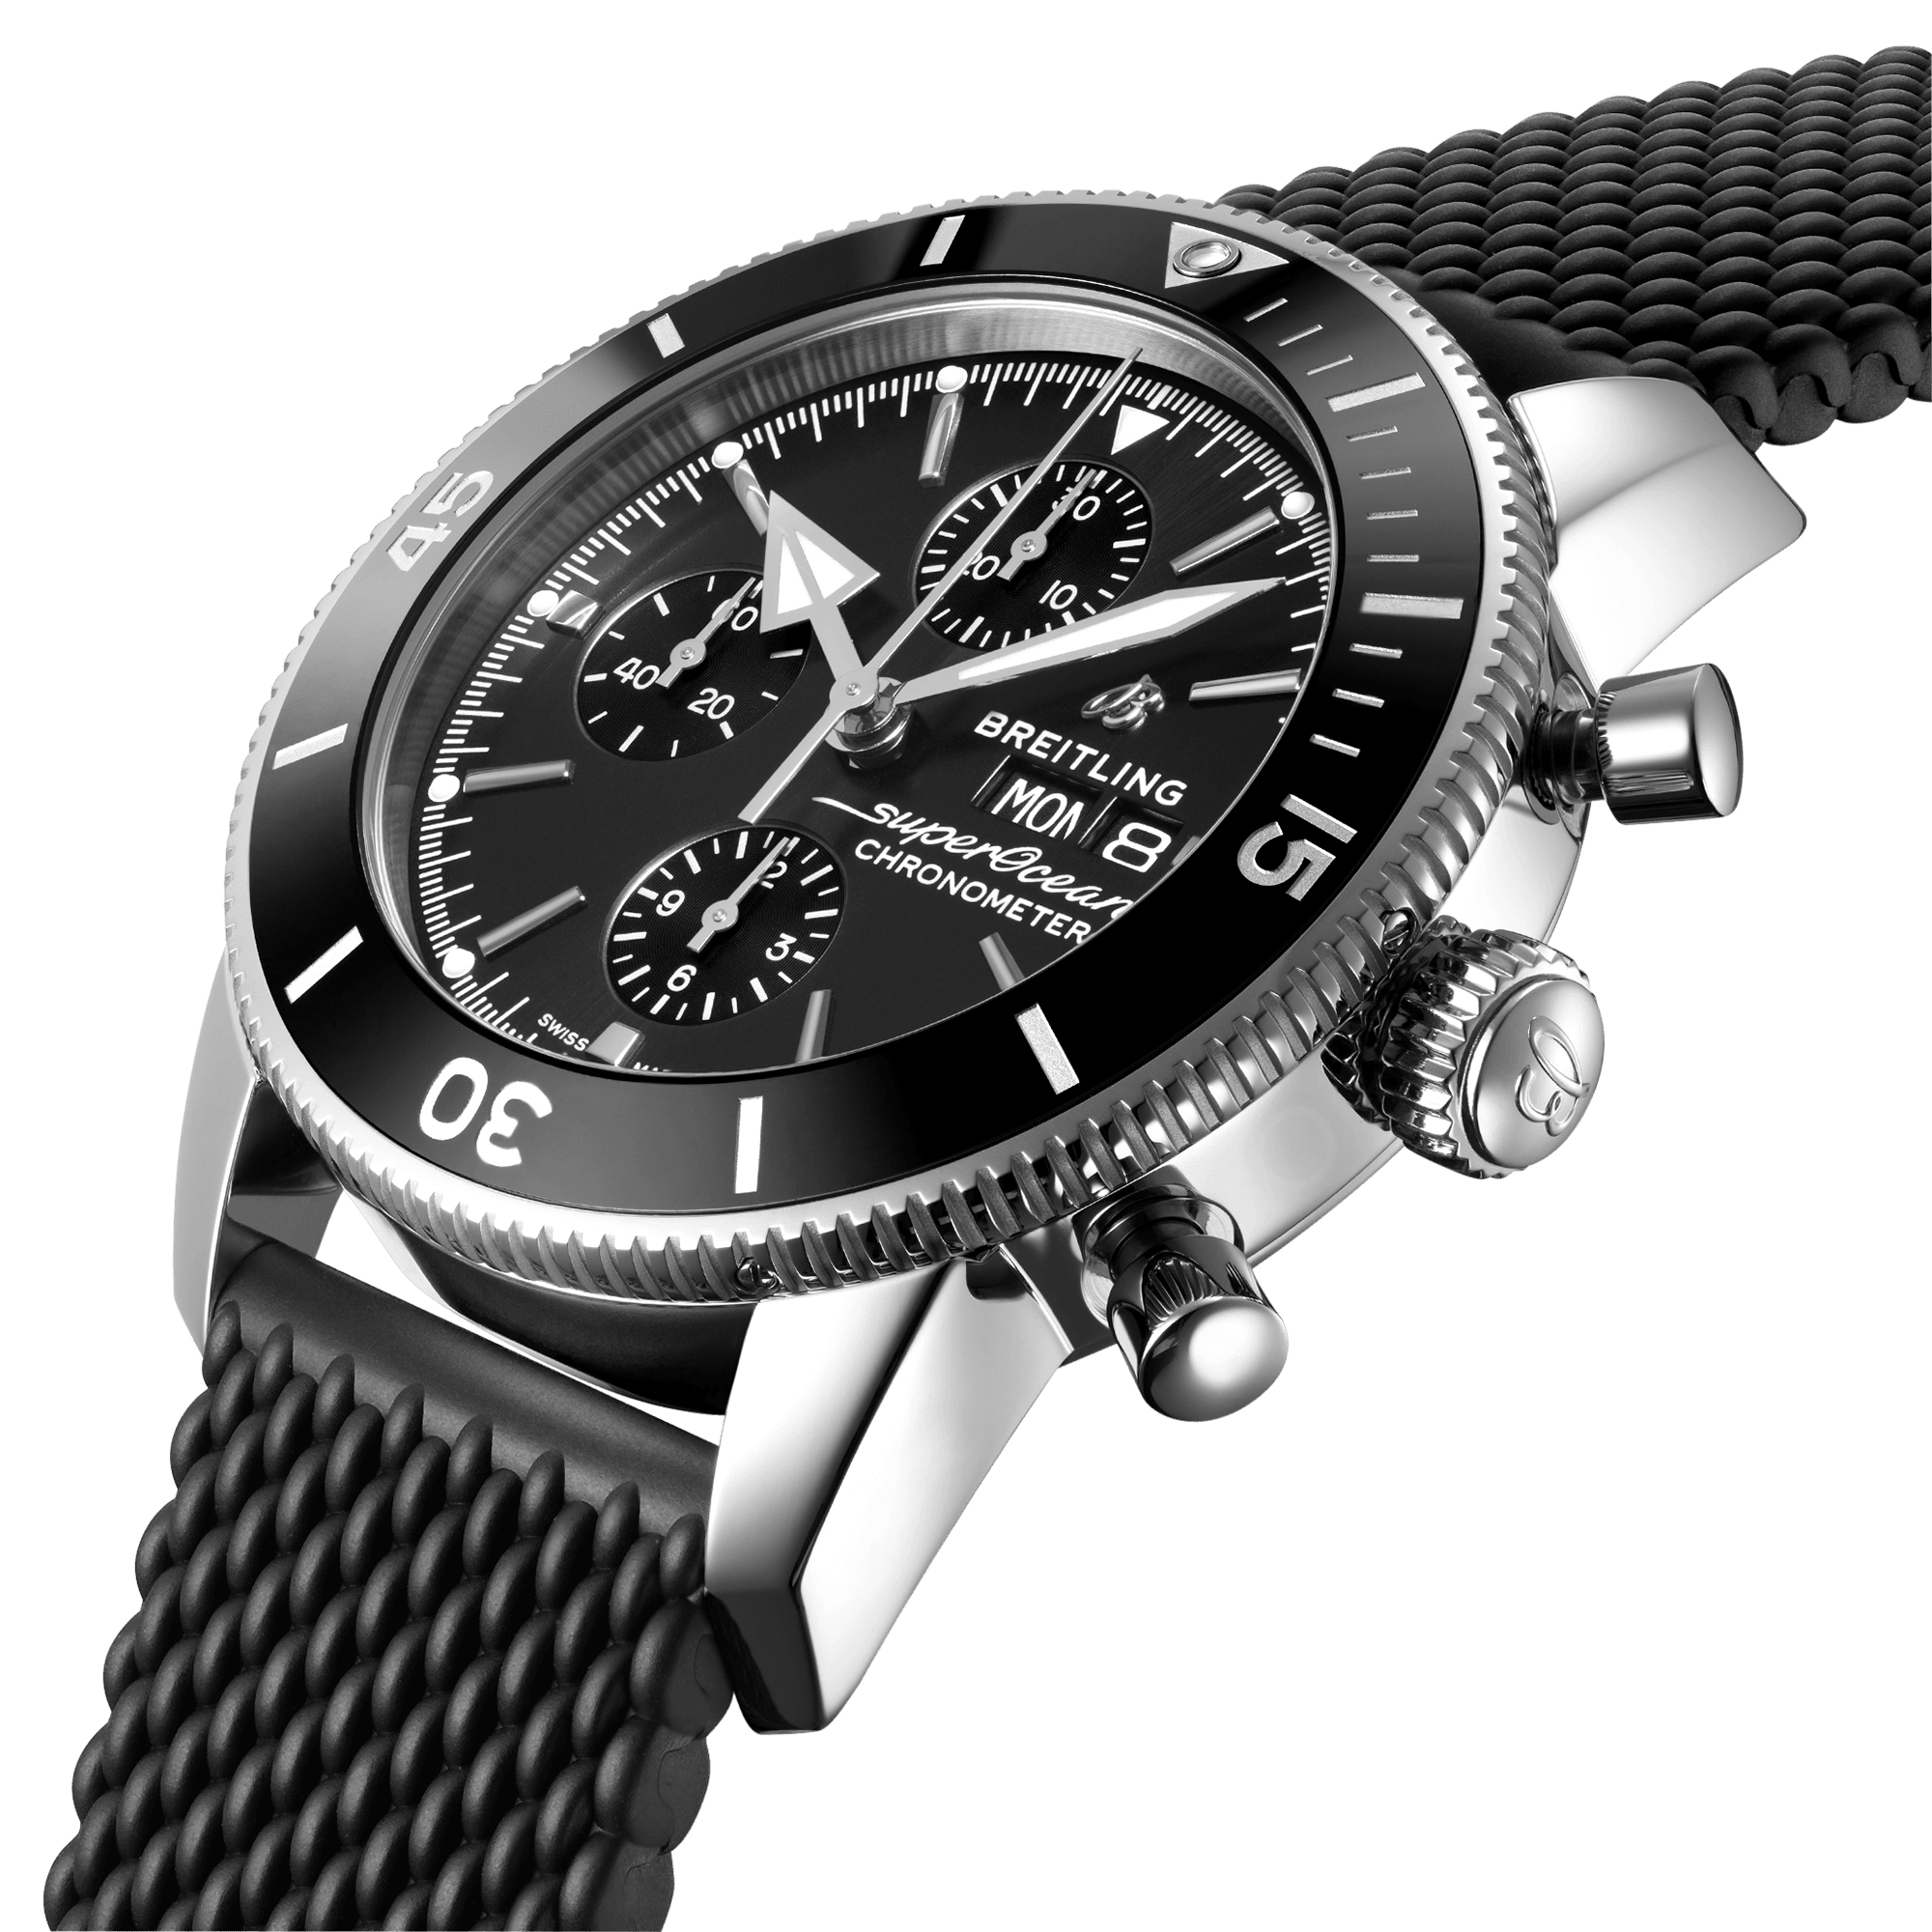 Superocean Heritage Chronograph 44mm Black Dial Automatic Strap Watch